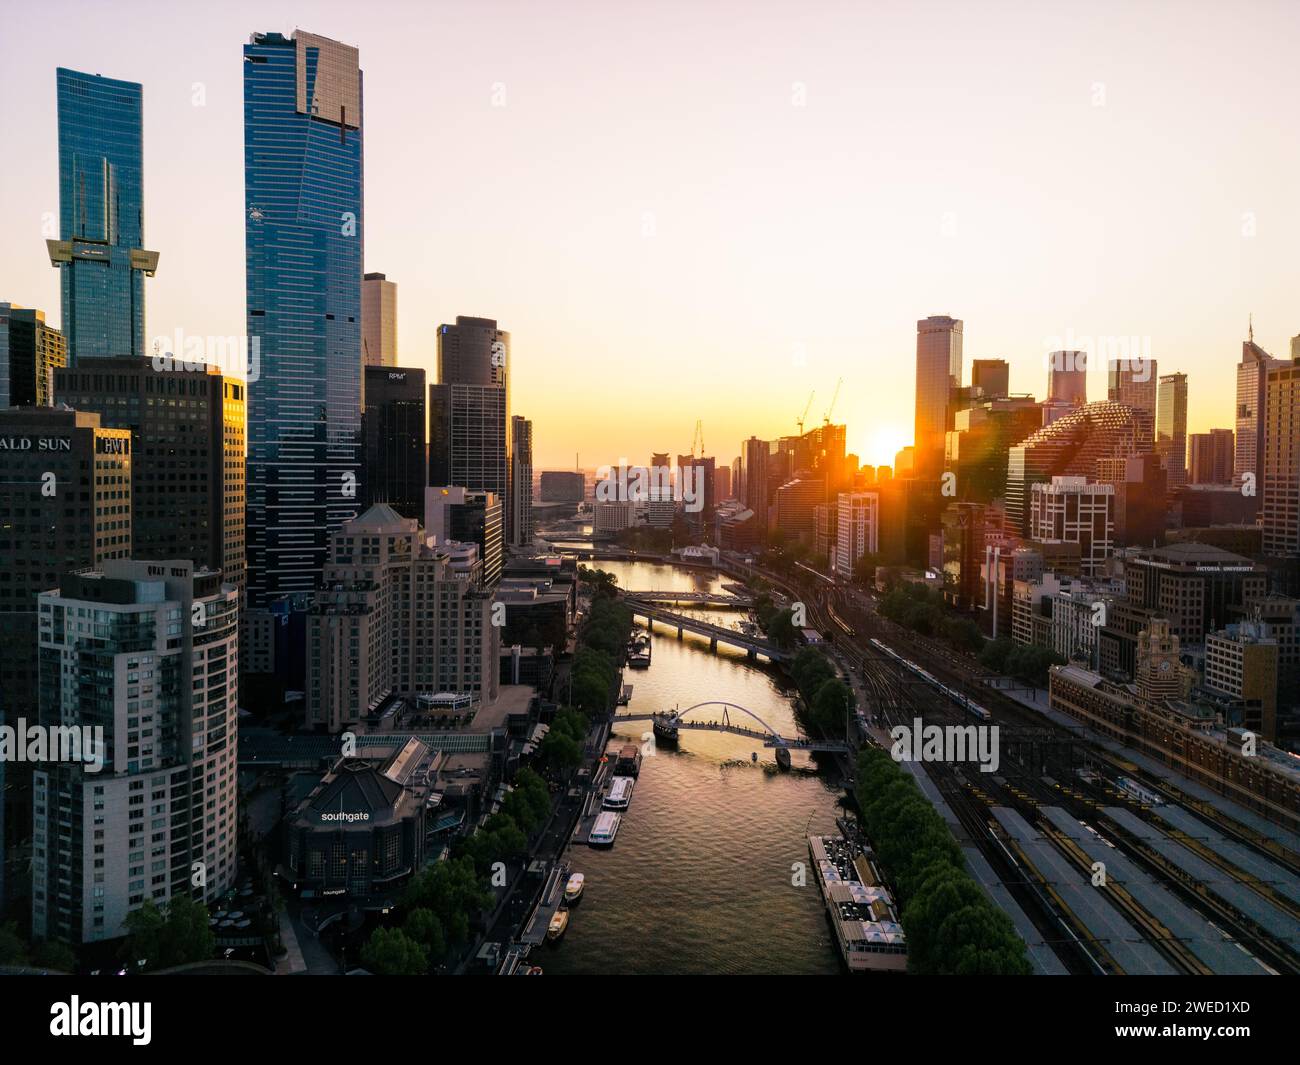 A view of the Yarra River flanked my tall city buidlings, boats moored on the banks and walk bridges taken at sunset in Melbourne, Australia. Stock Photo